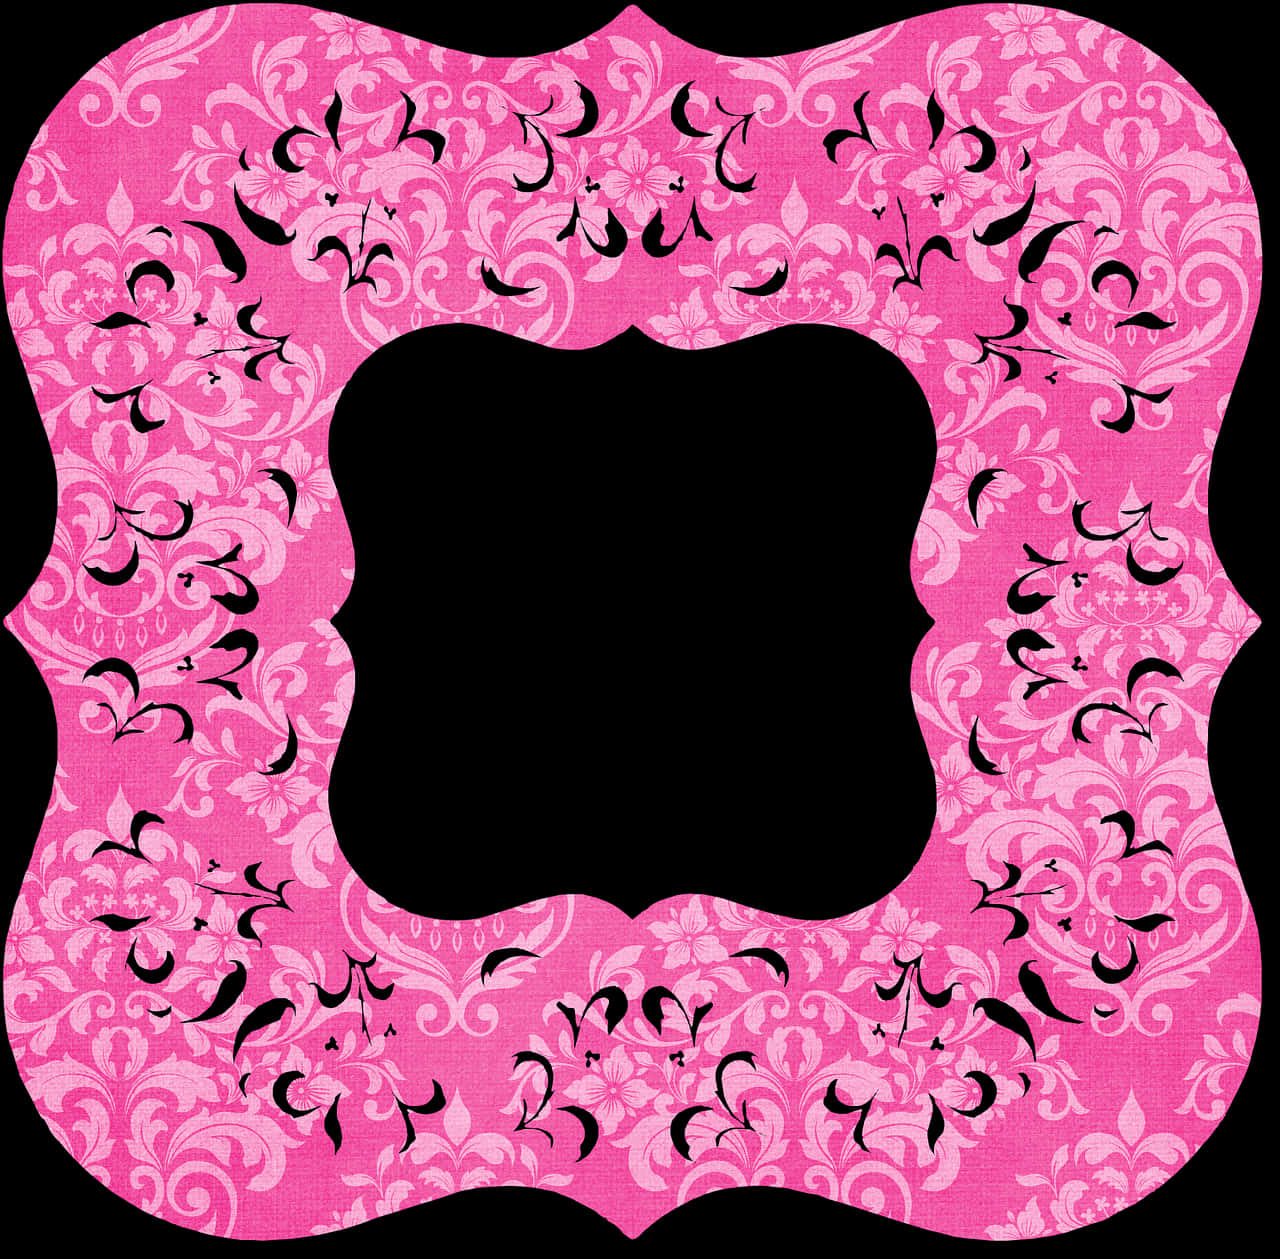 A Pink And White Floral Frame